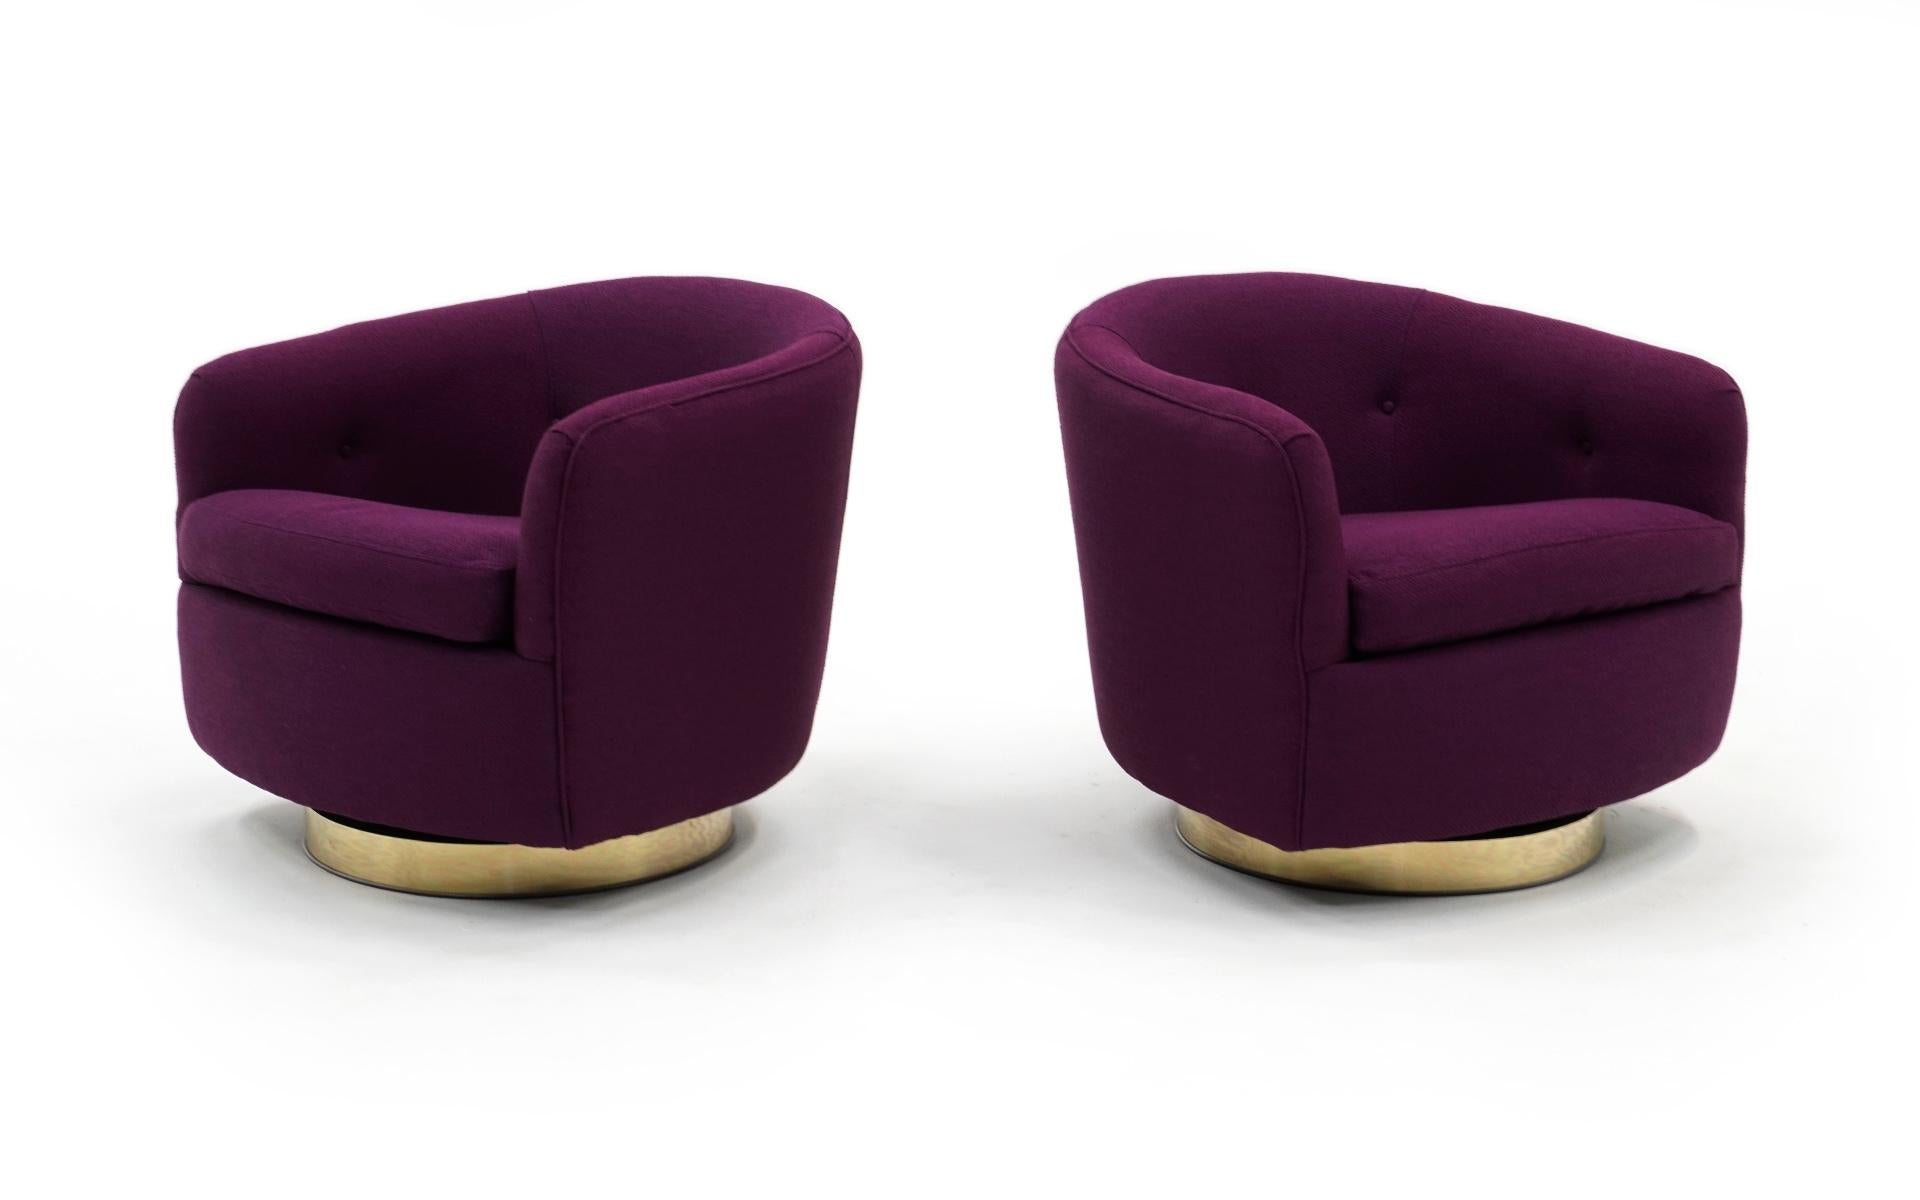 Stunning pair of Milo Baughman for Thayer Coggin tilt and swivel even arm barrel chairs on brass bases. These have been completely restored and reupholstered in a beautiful purple Maharam fabric. Bases may show minimal wear, but only upon close